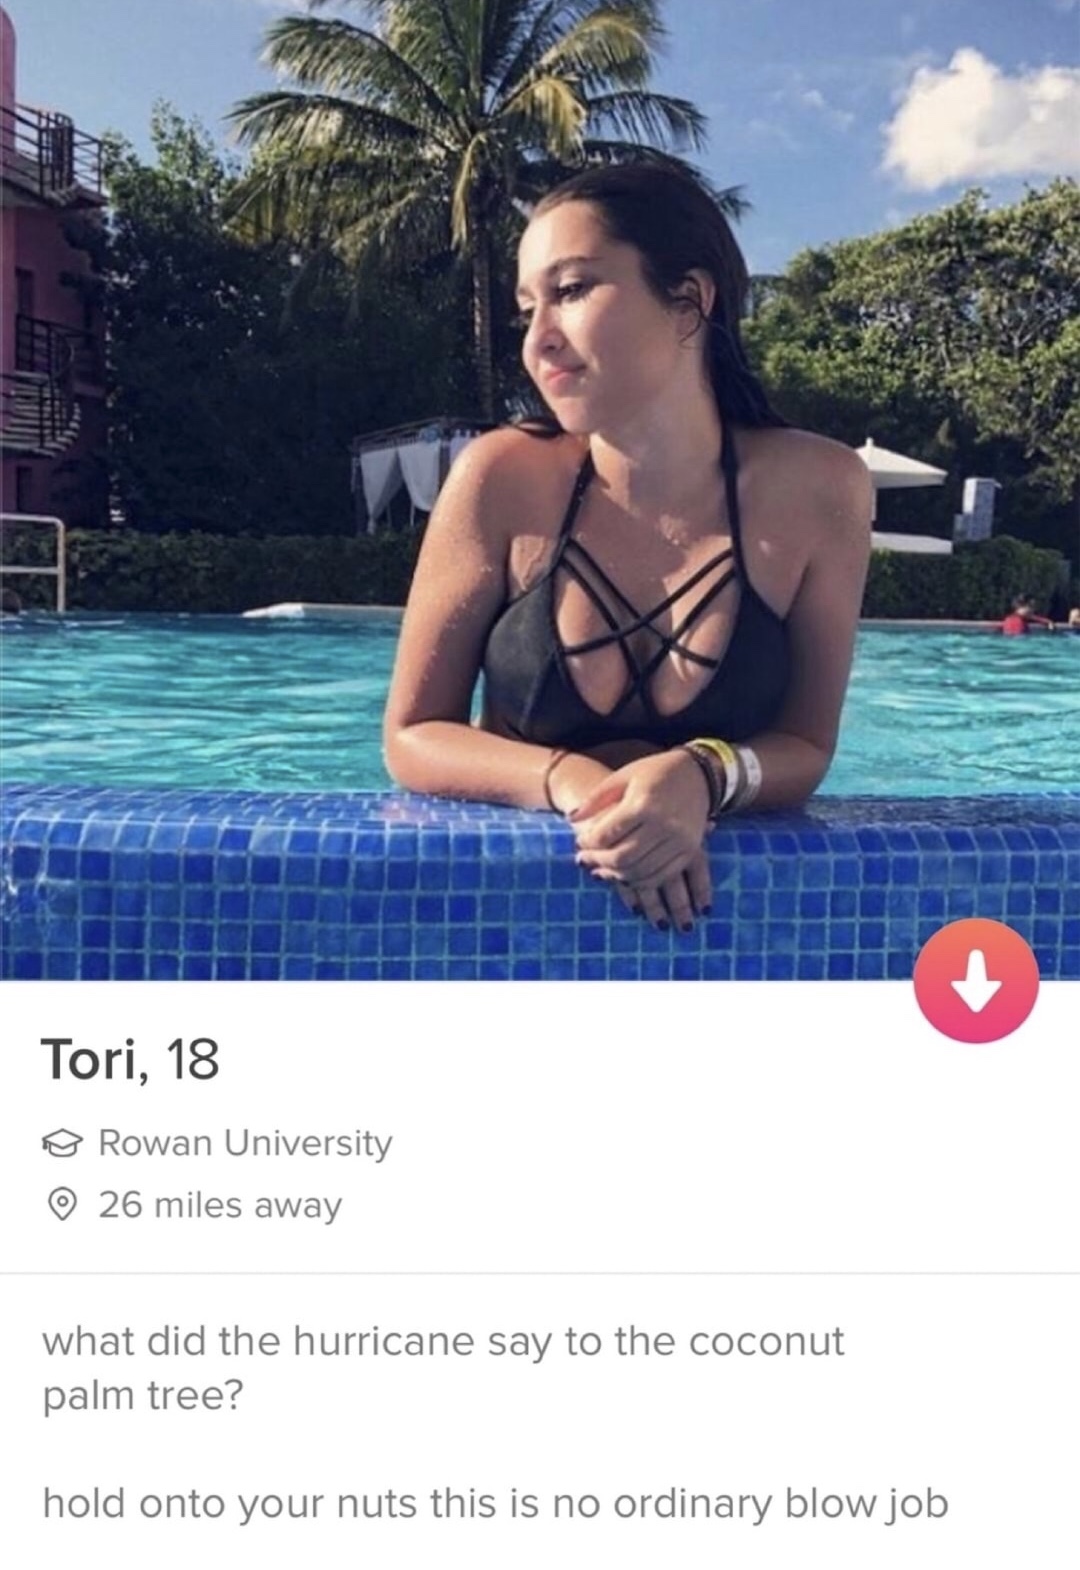 bikini - Tori, 18 Rowan University 26 miles away what did the hurricane say to the coconut palm tree? hold onto your nuts this is no ordinary blow job